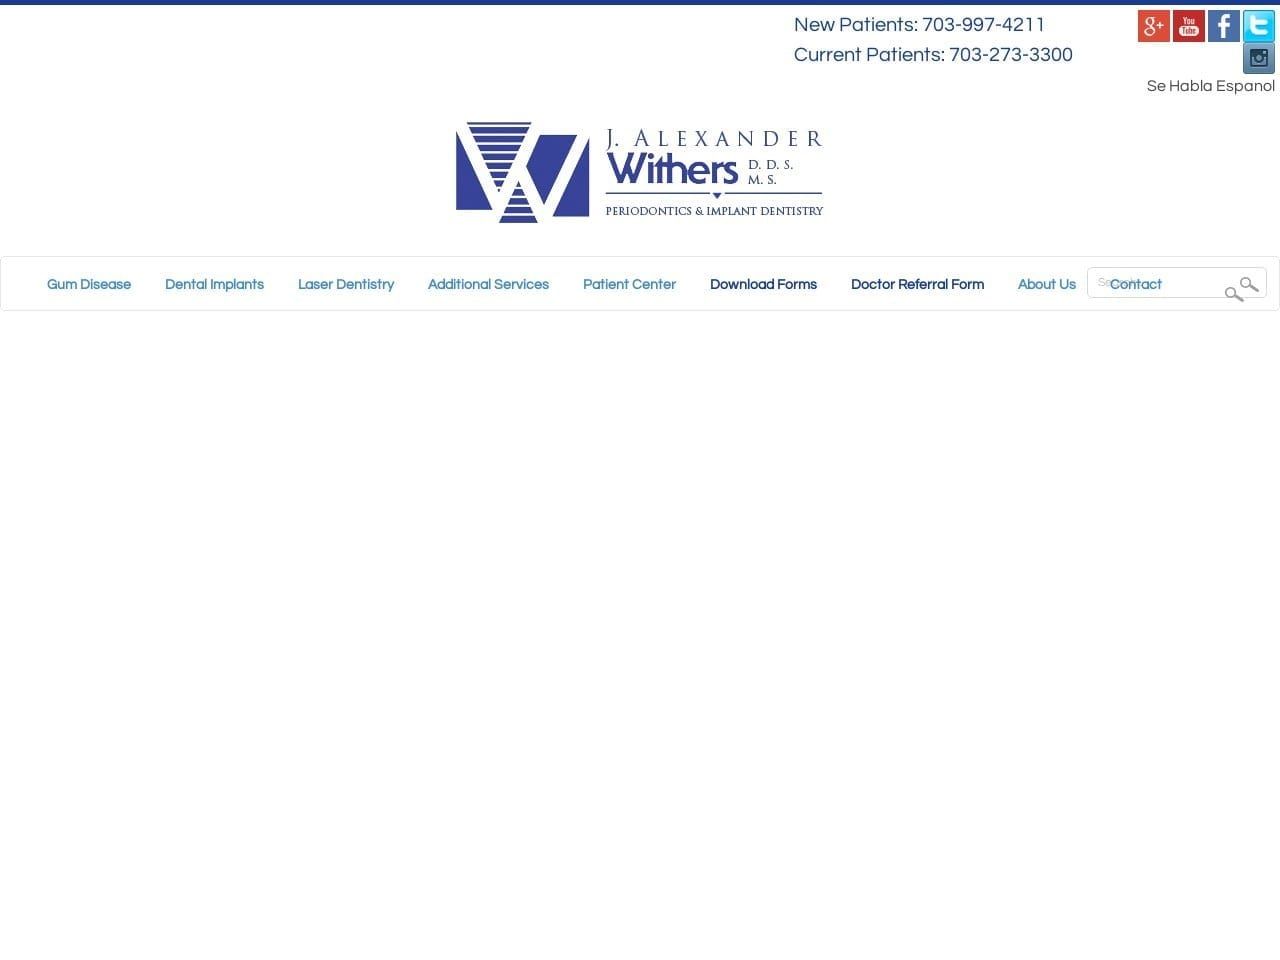 J. Alexander Withers DDS Website Screenshot from withersperio.com